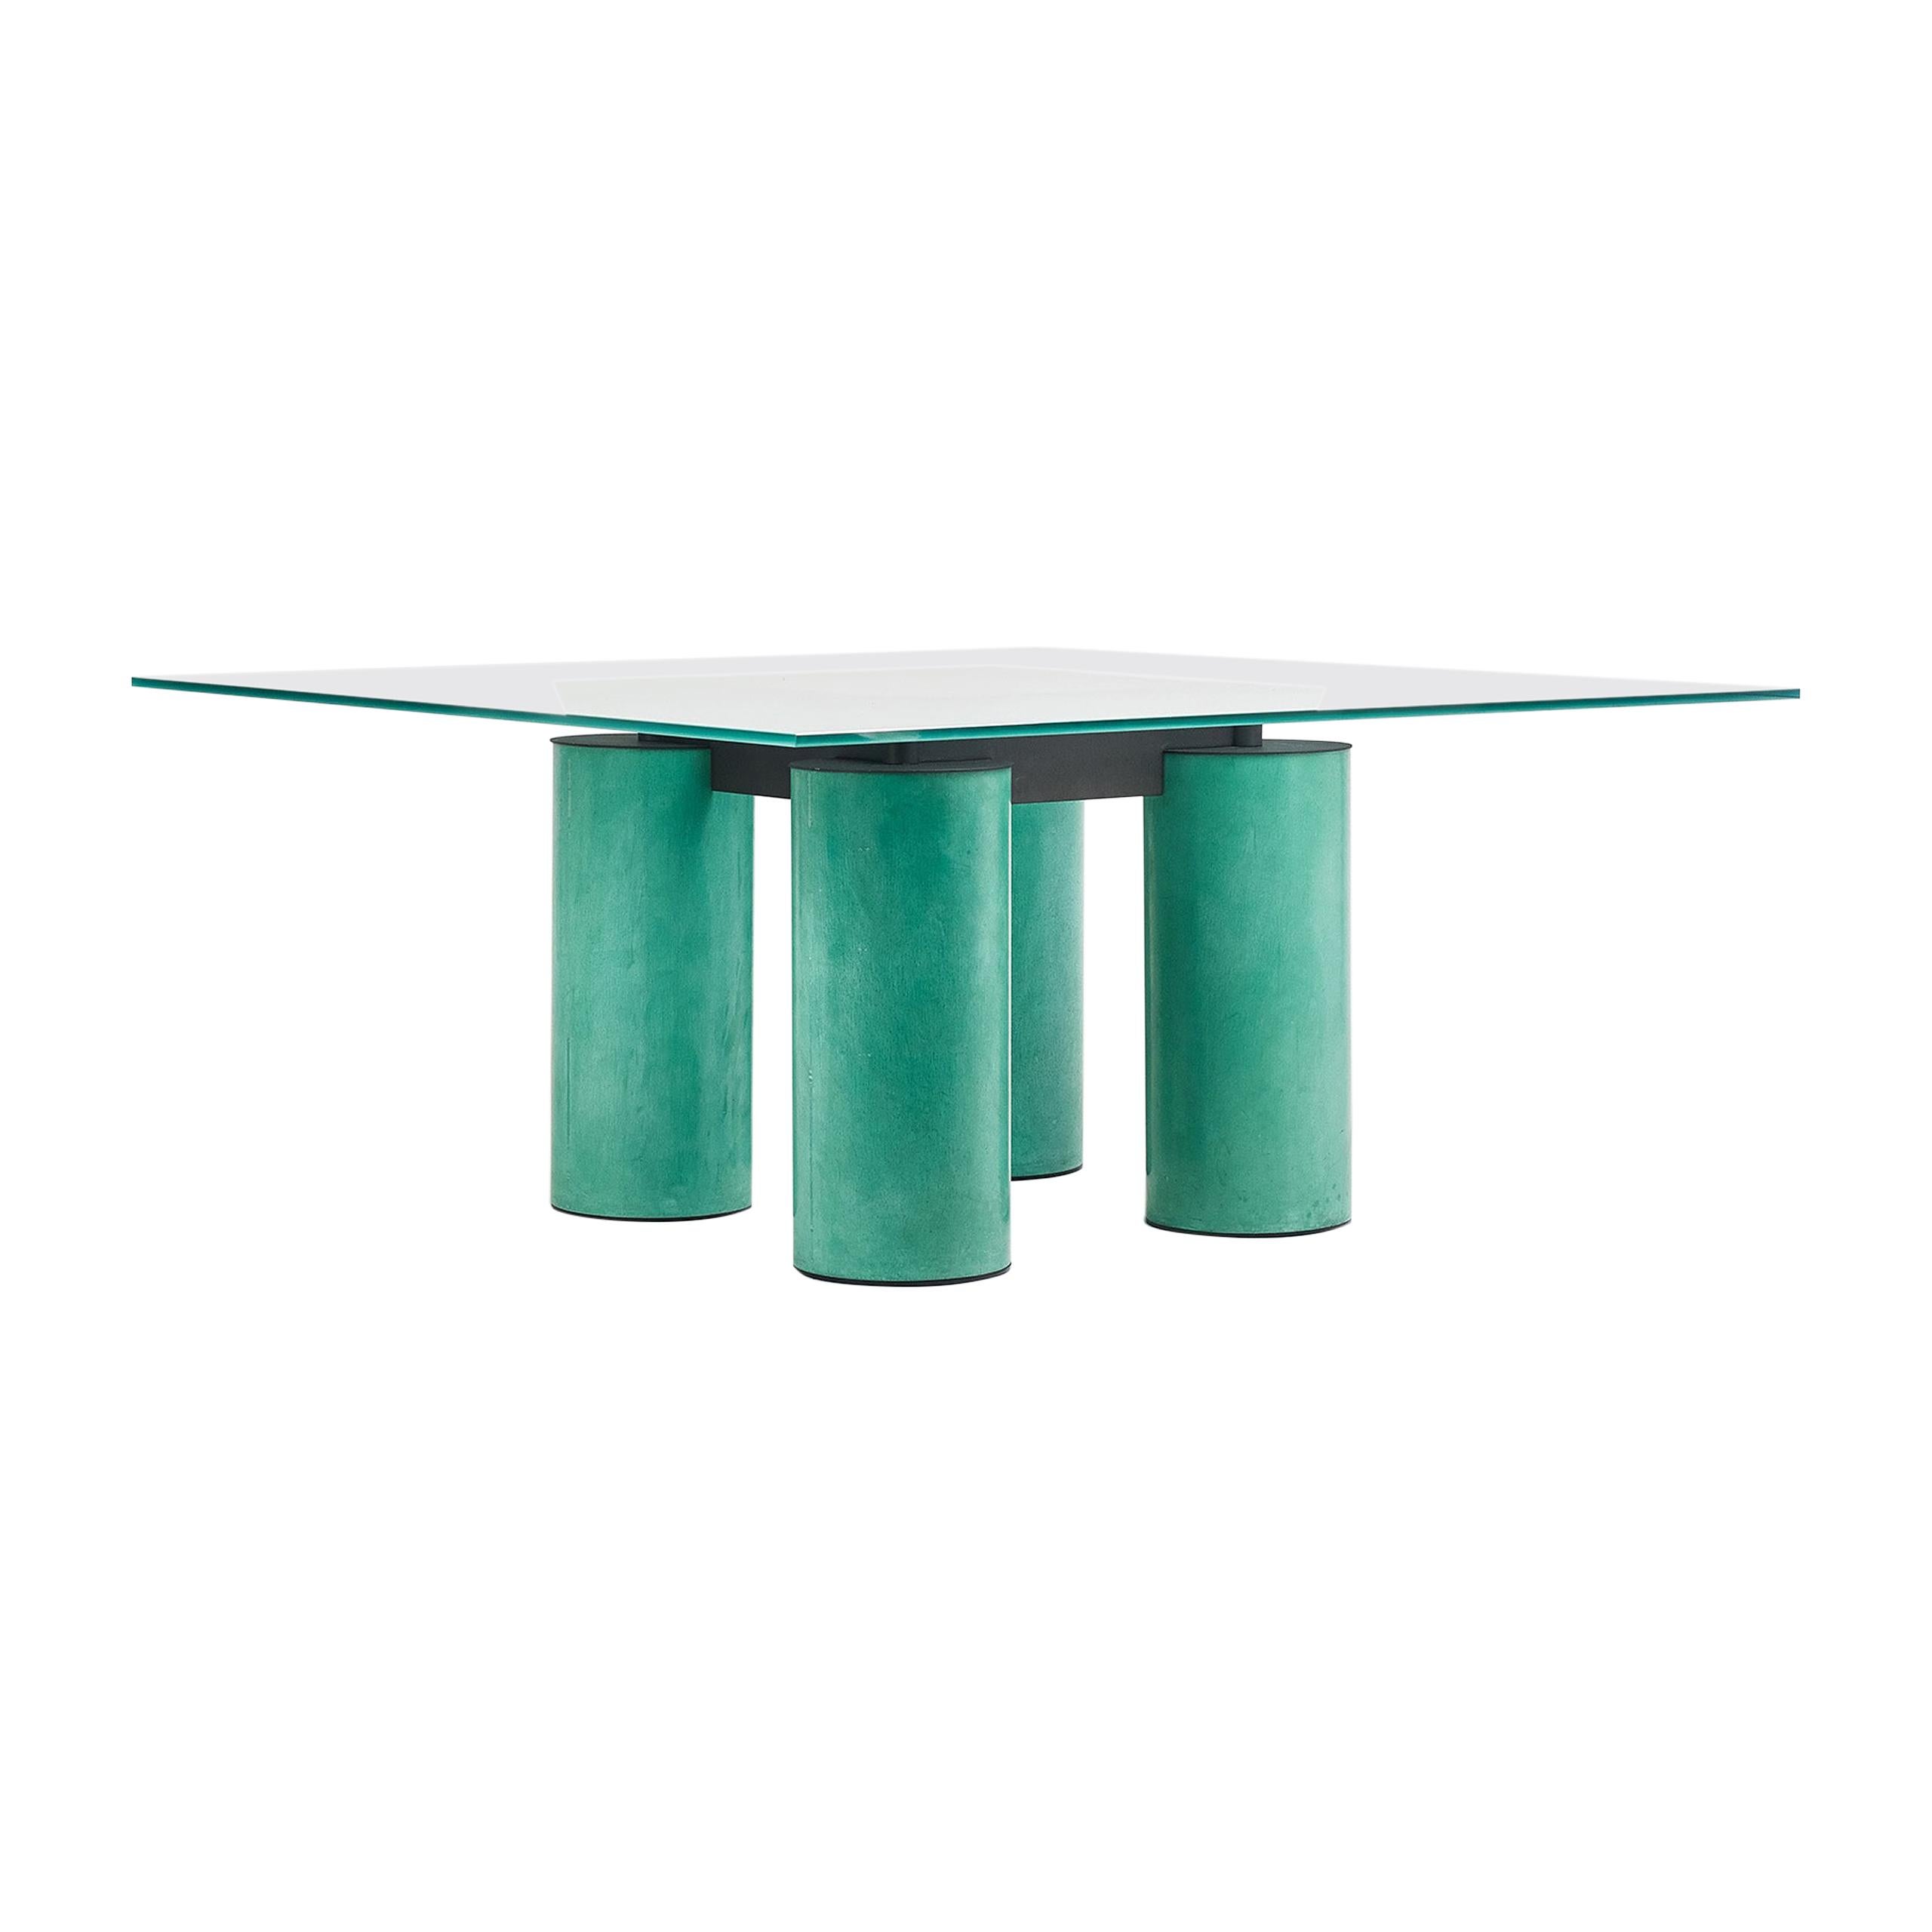 Lella & Massimo Vignelli "Serenissimo" Dining Table for Acerbis, Italy